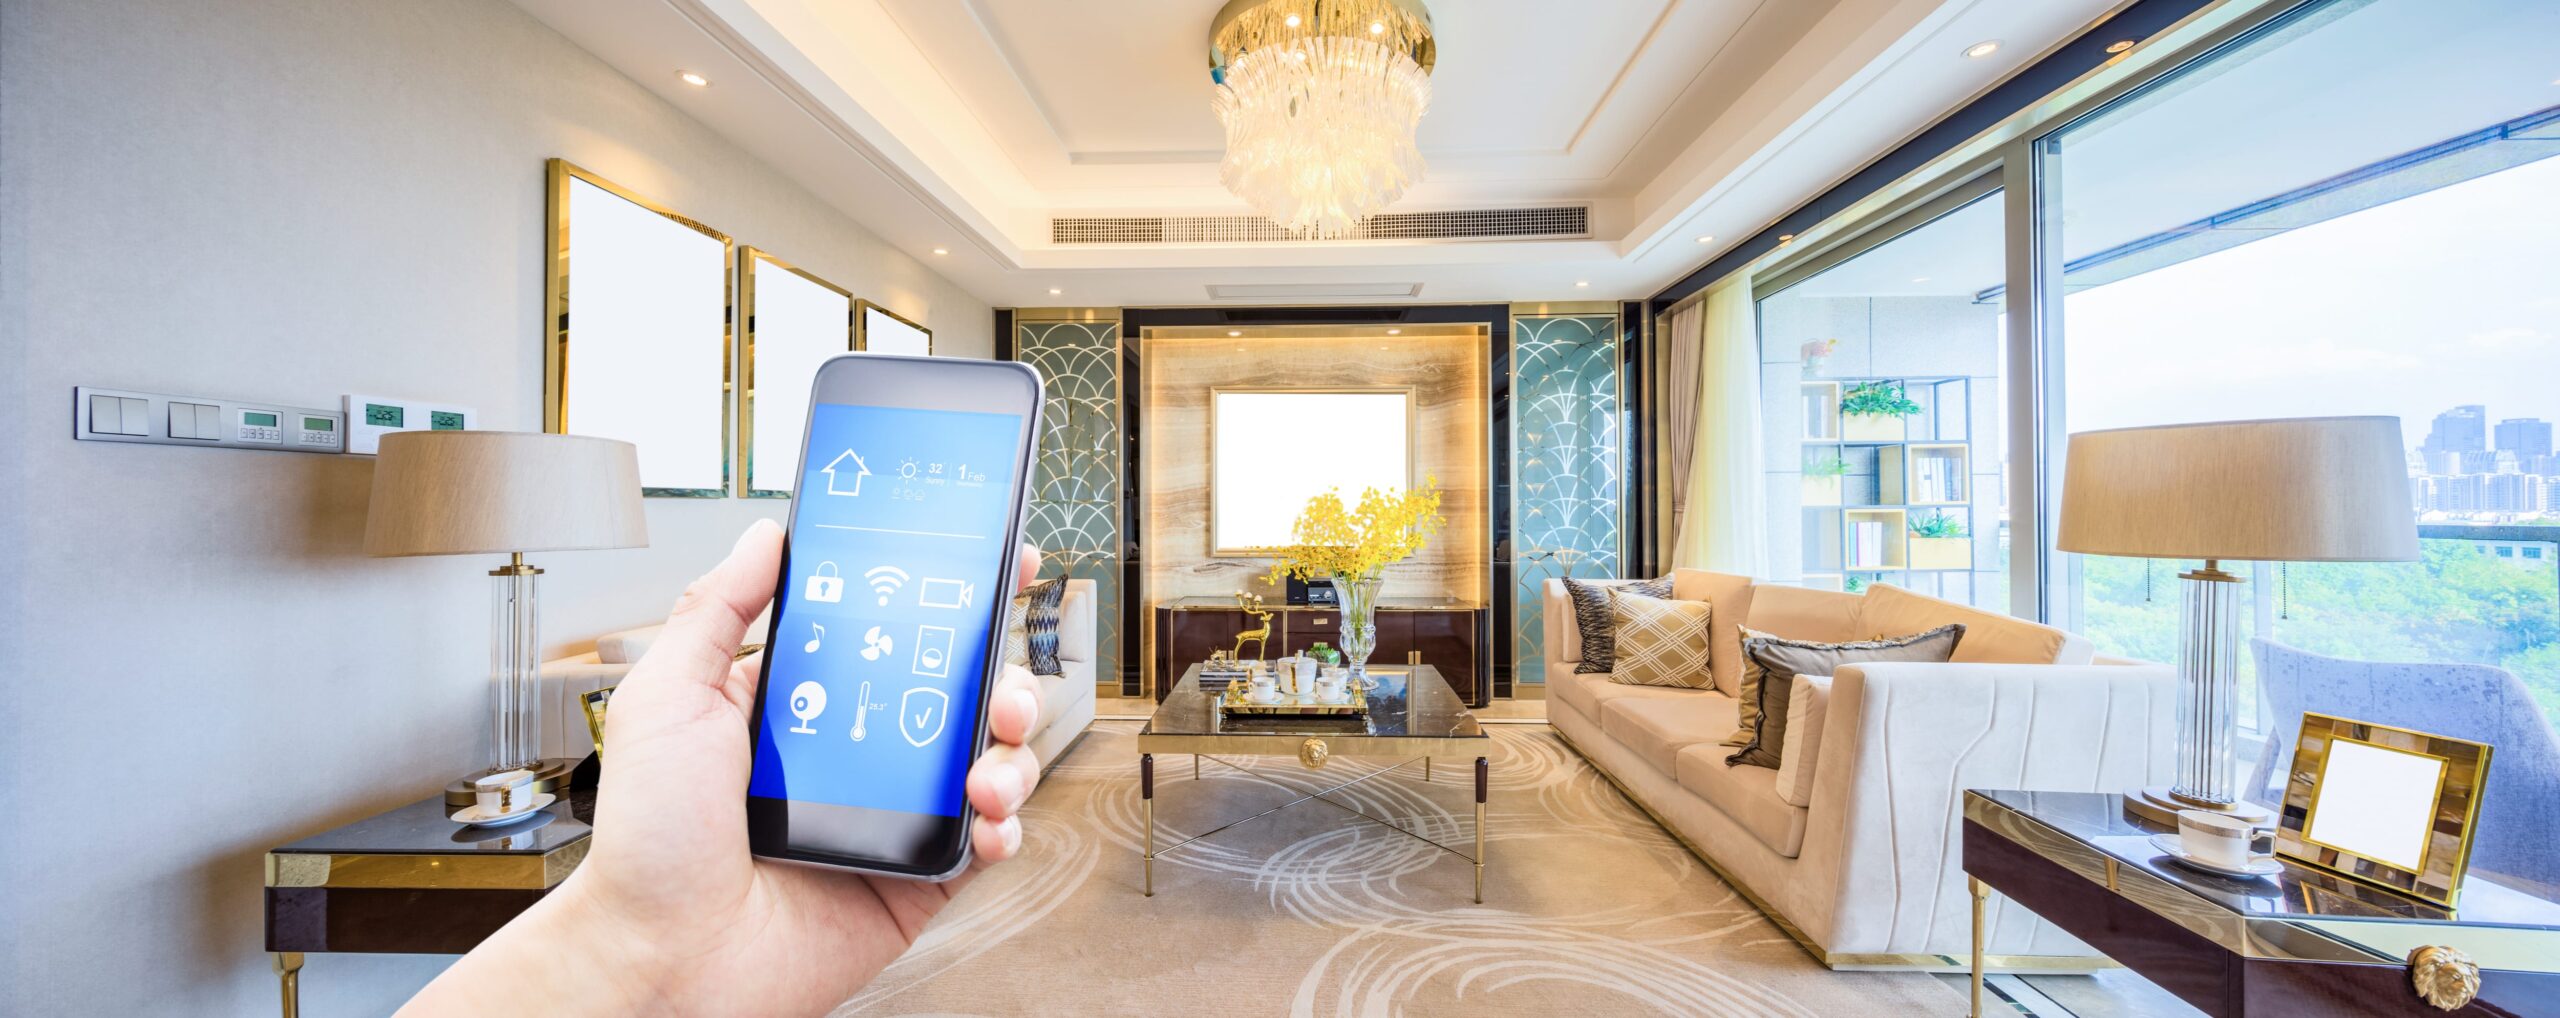 Security Is A Lifestyle - Smart Home Automation System